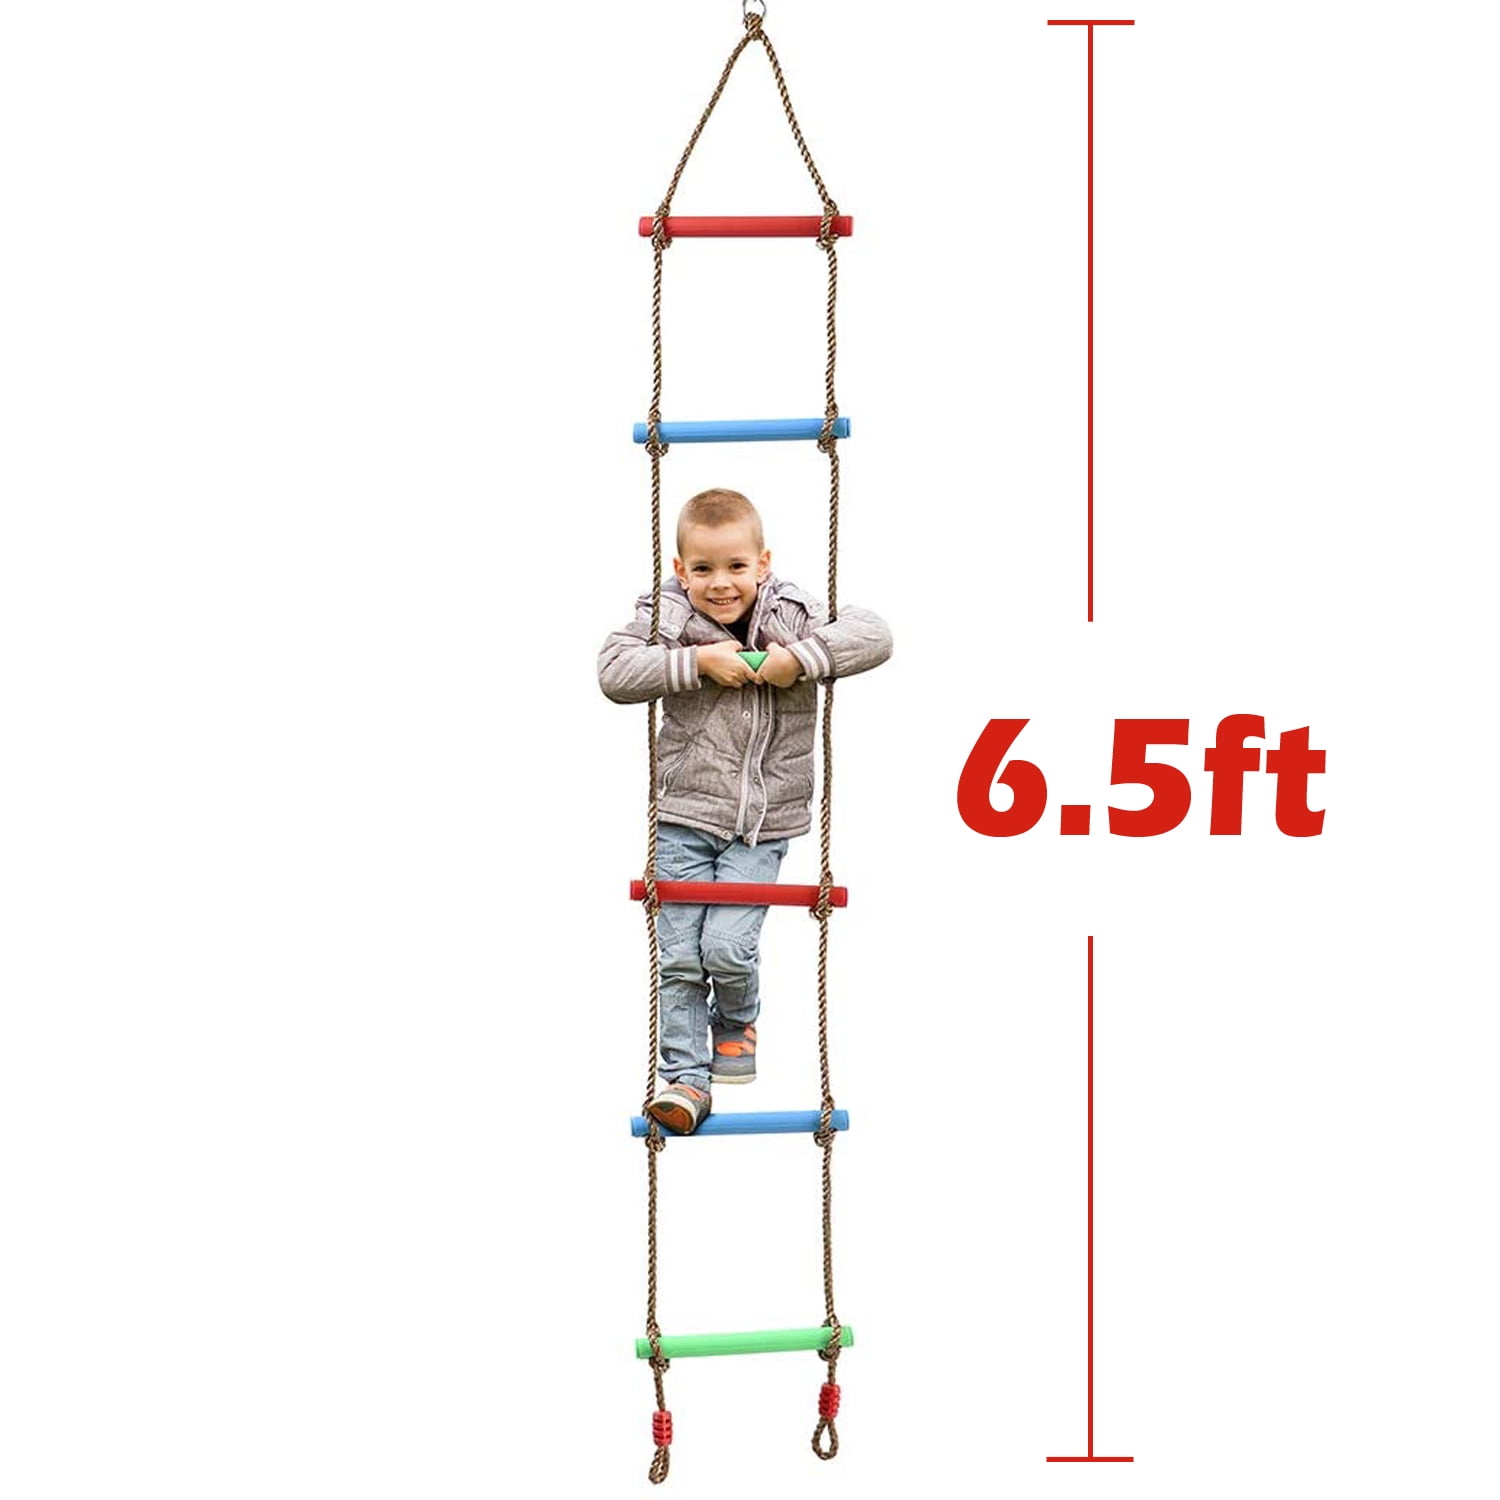 Over-the-Rainbow Climbing Rope Ladder Playground Swing Sets Tree House Accessories Sturdy Nylon Enamel Coated Smooth Metal Rungs 6 Long 